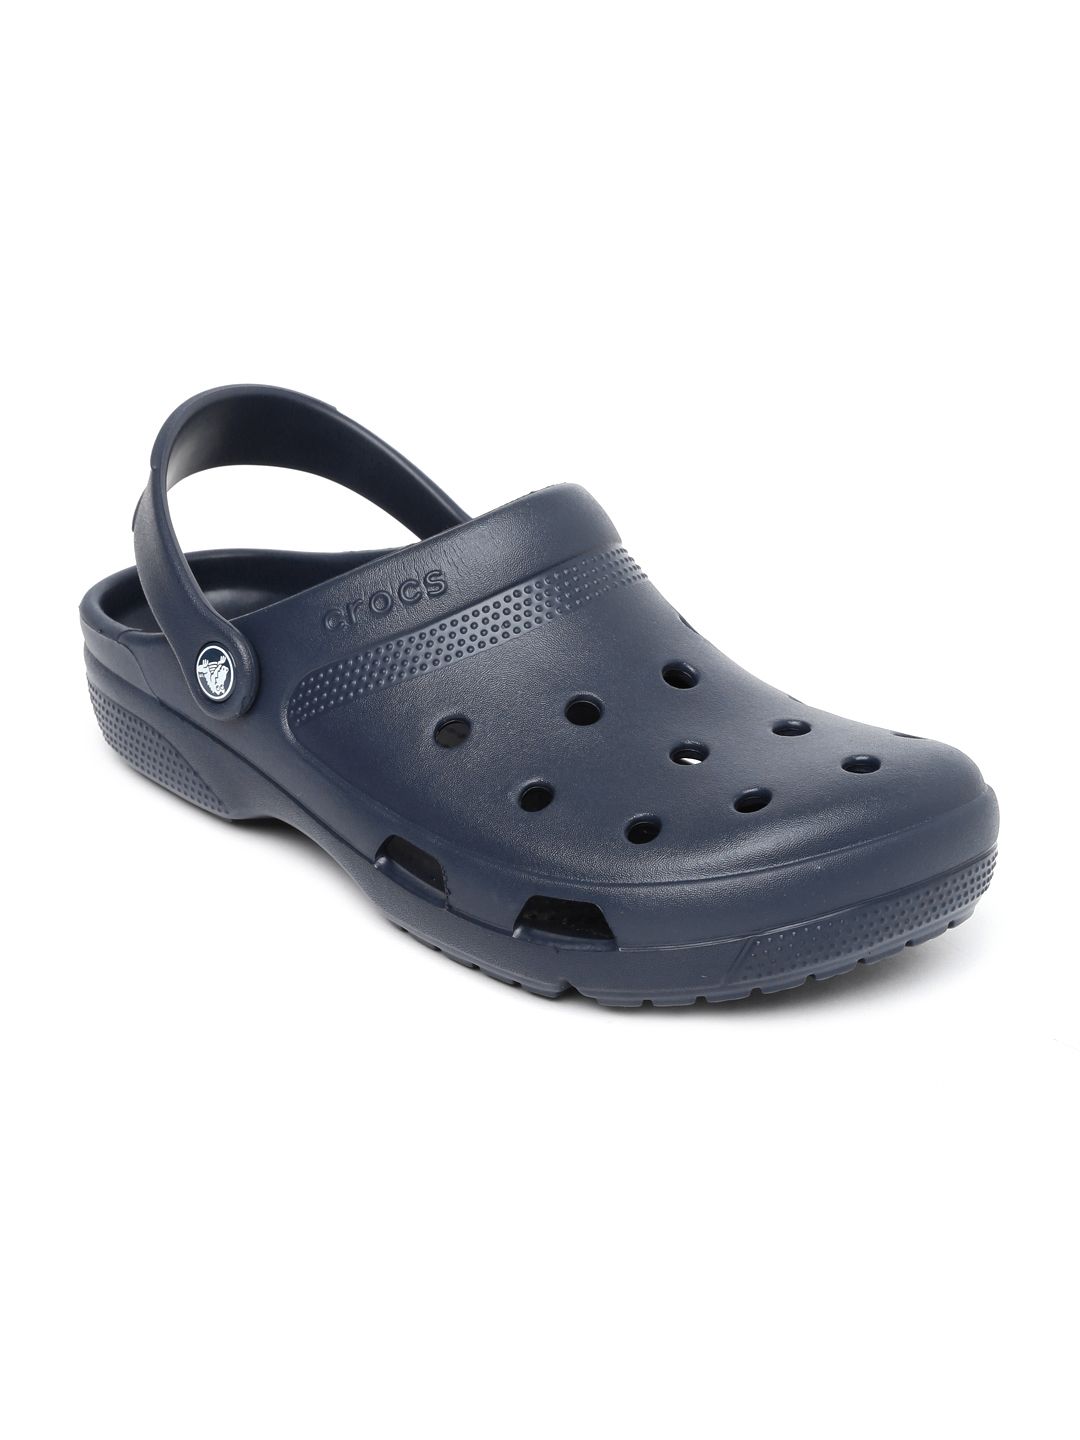  Crocs  Classic Navy  Blue  Clogs for Men online in India at 